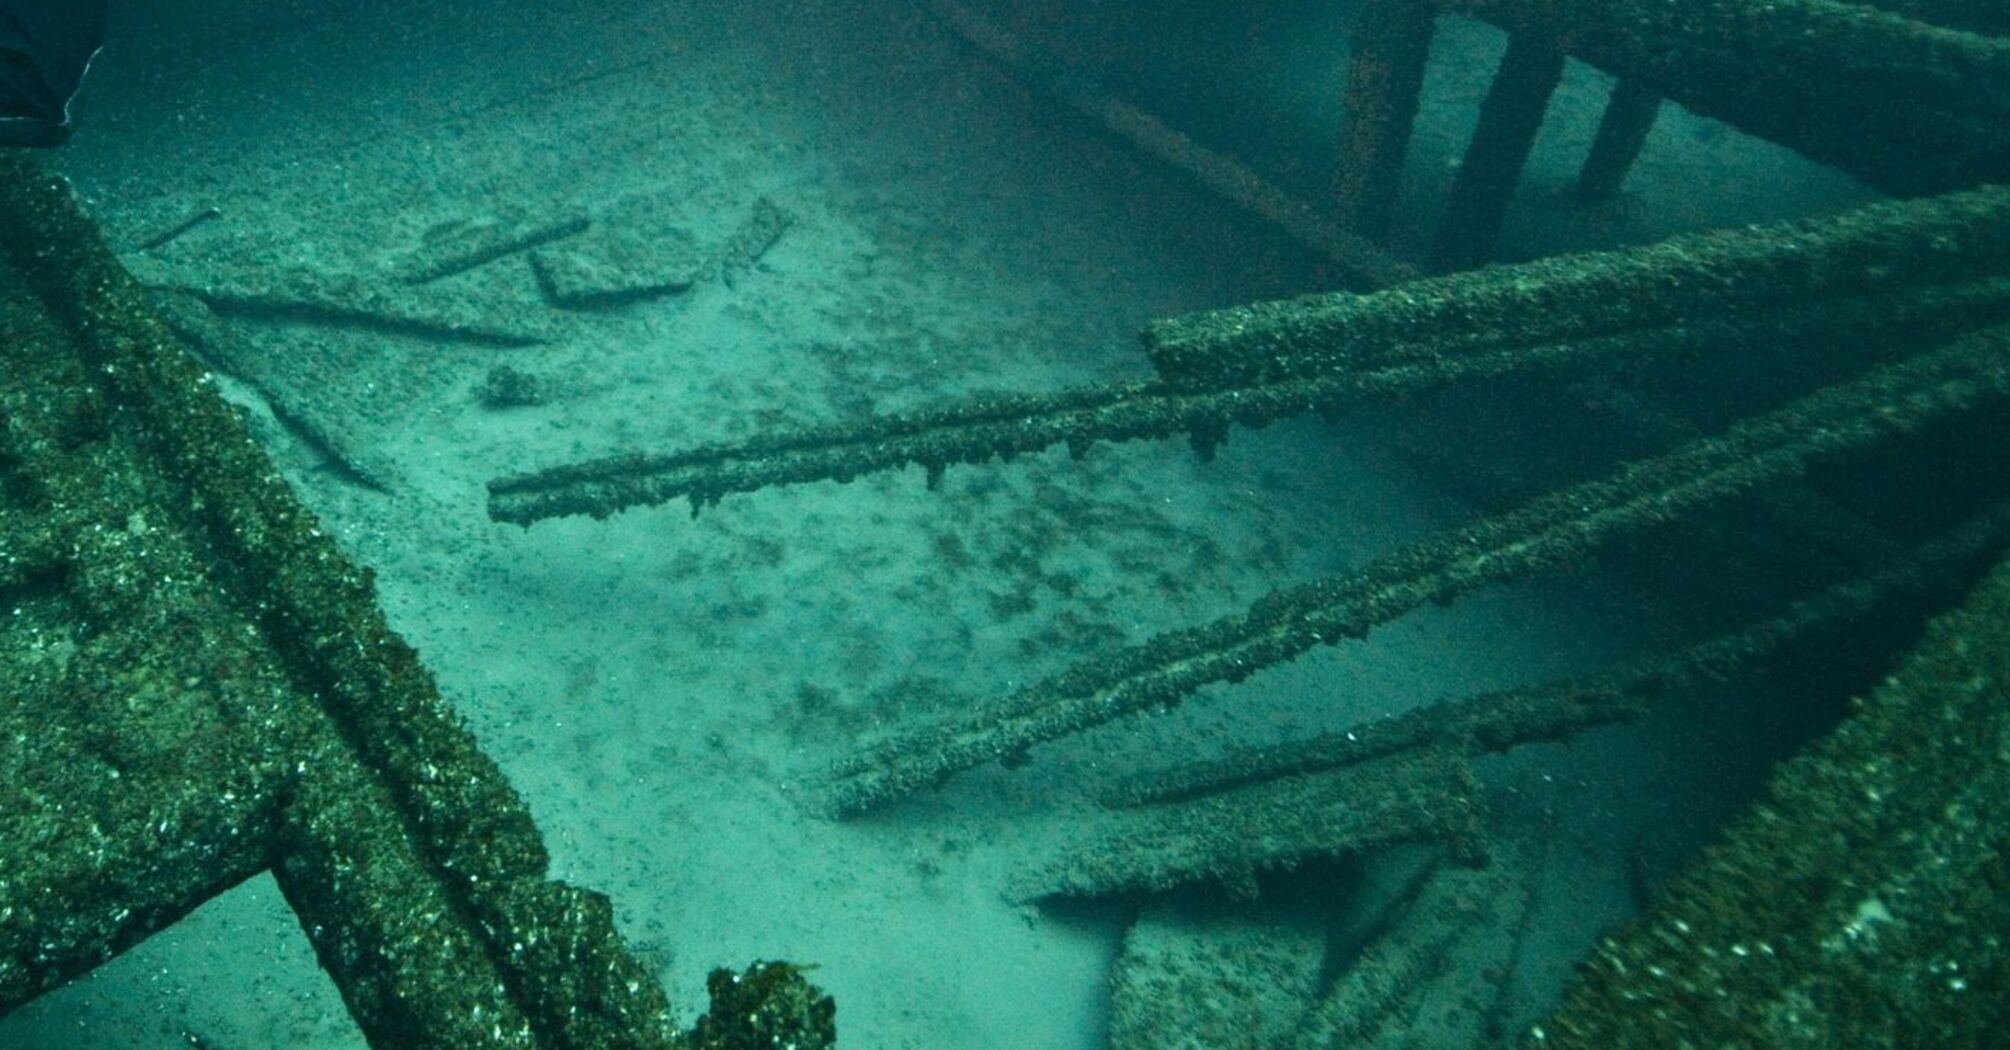 Near the coast of Canada, a ship has emerged that could be over 200 years old